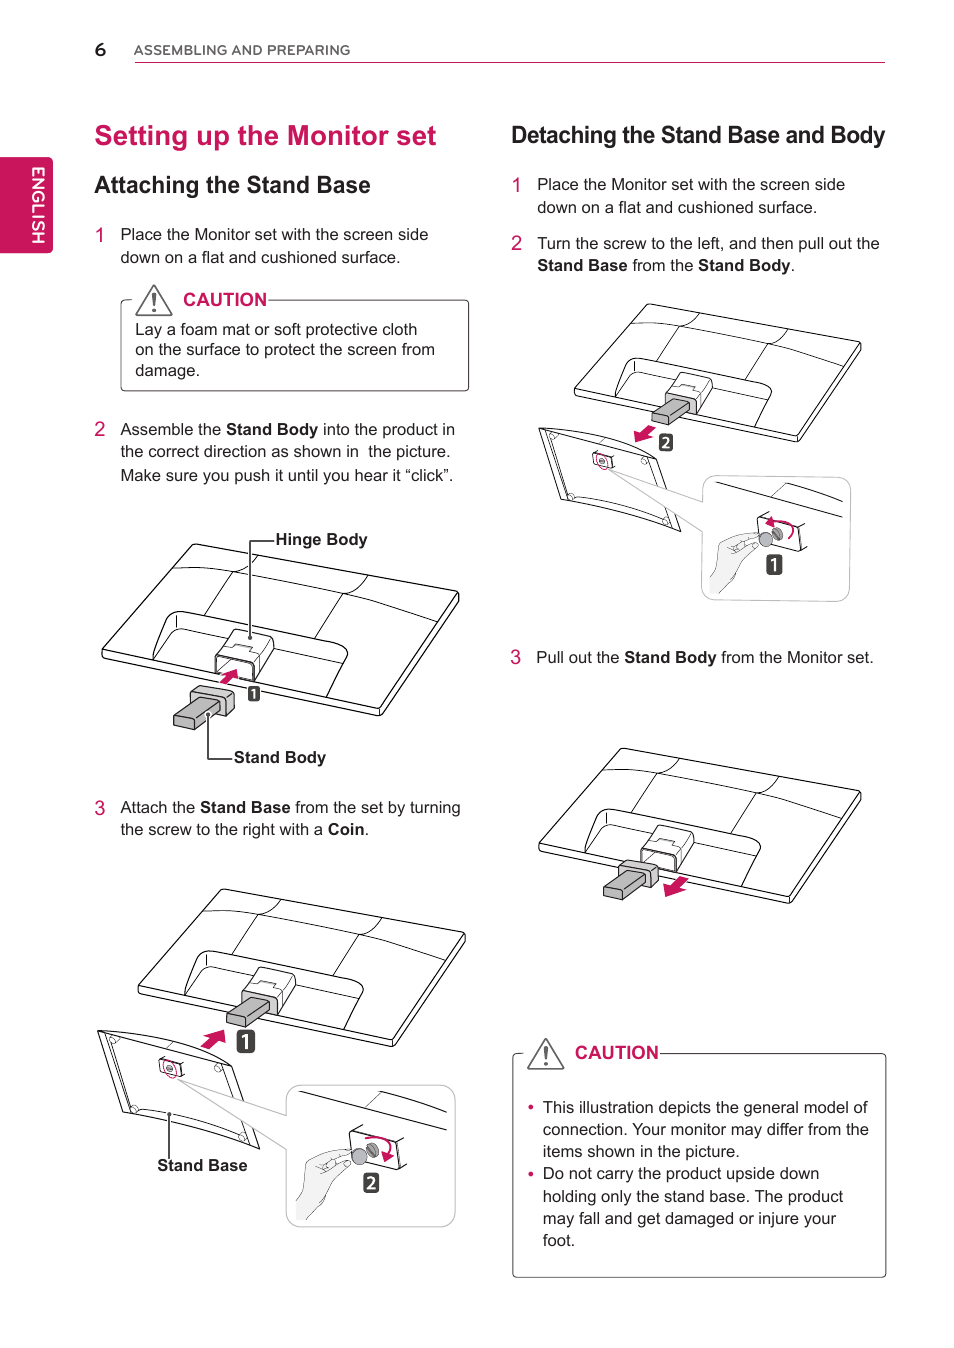 Setting up the monitor set, Attaching the stand base, Detaching the stand base and body | LG D2342P User Manual | Page 6 / 22